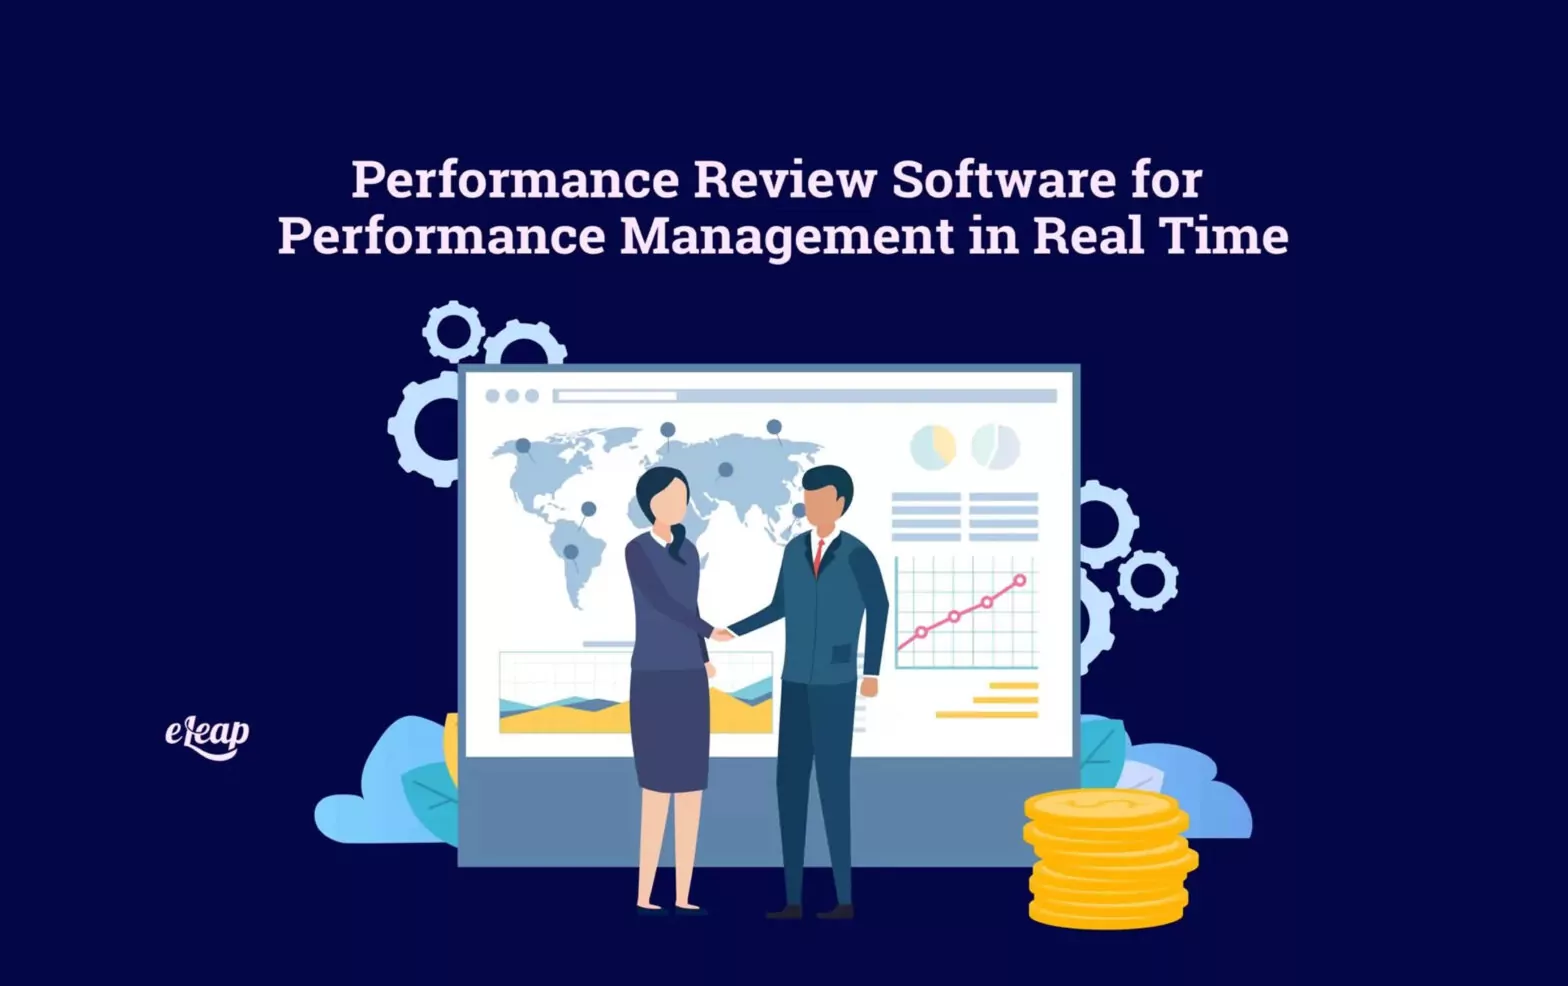 Performance Review Software for Performance Management in Real Time